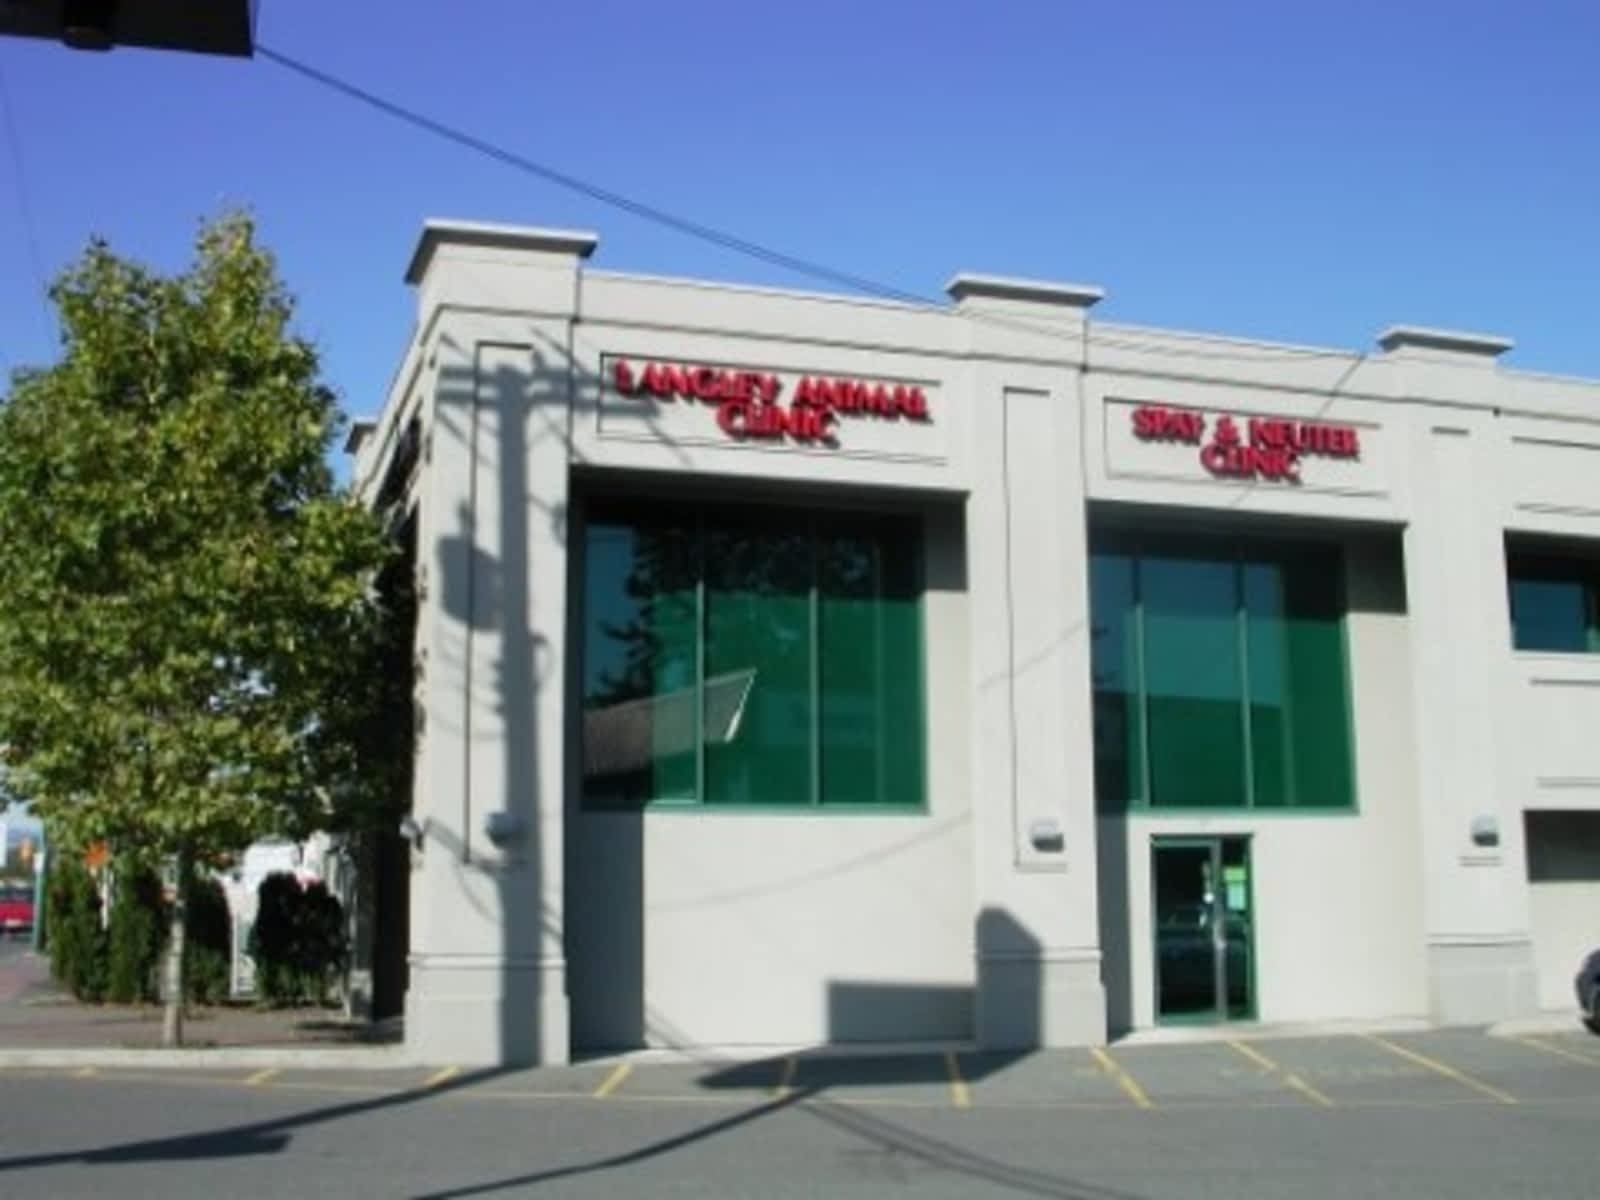 Langley Animal Clinic Ltd - Opening Hours - 5758 203 St, Langley, BC